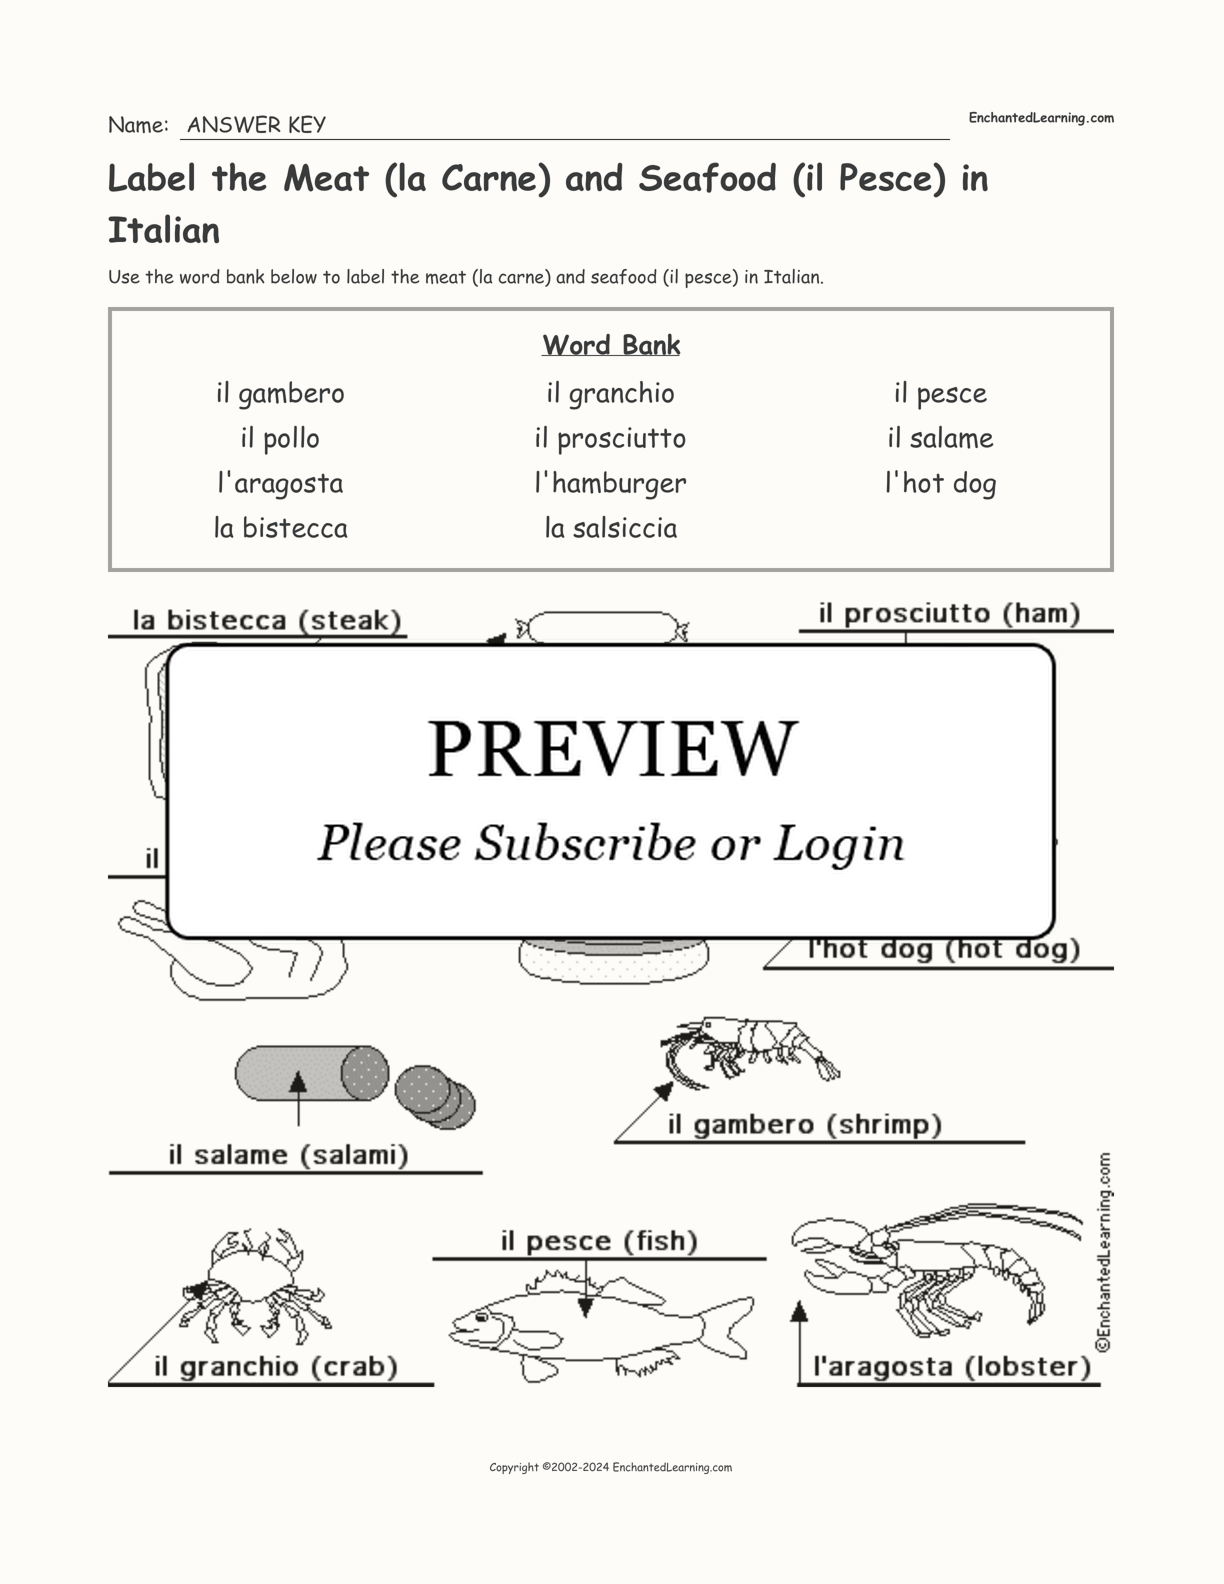 Label the Meat (la Carne) and Seafood (il Pesce) in Italian interactive worksheet page 2